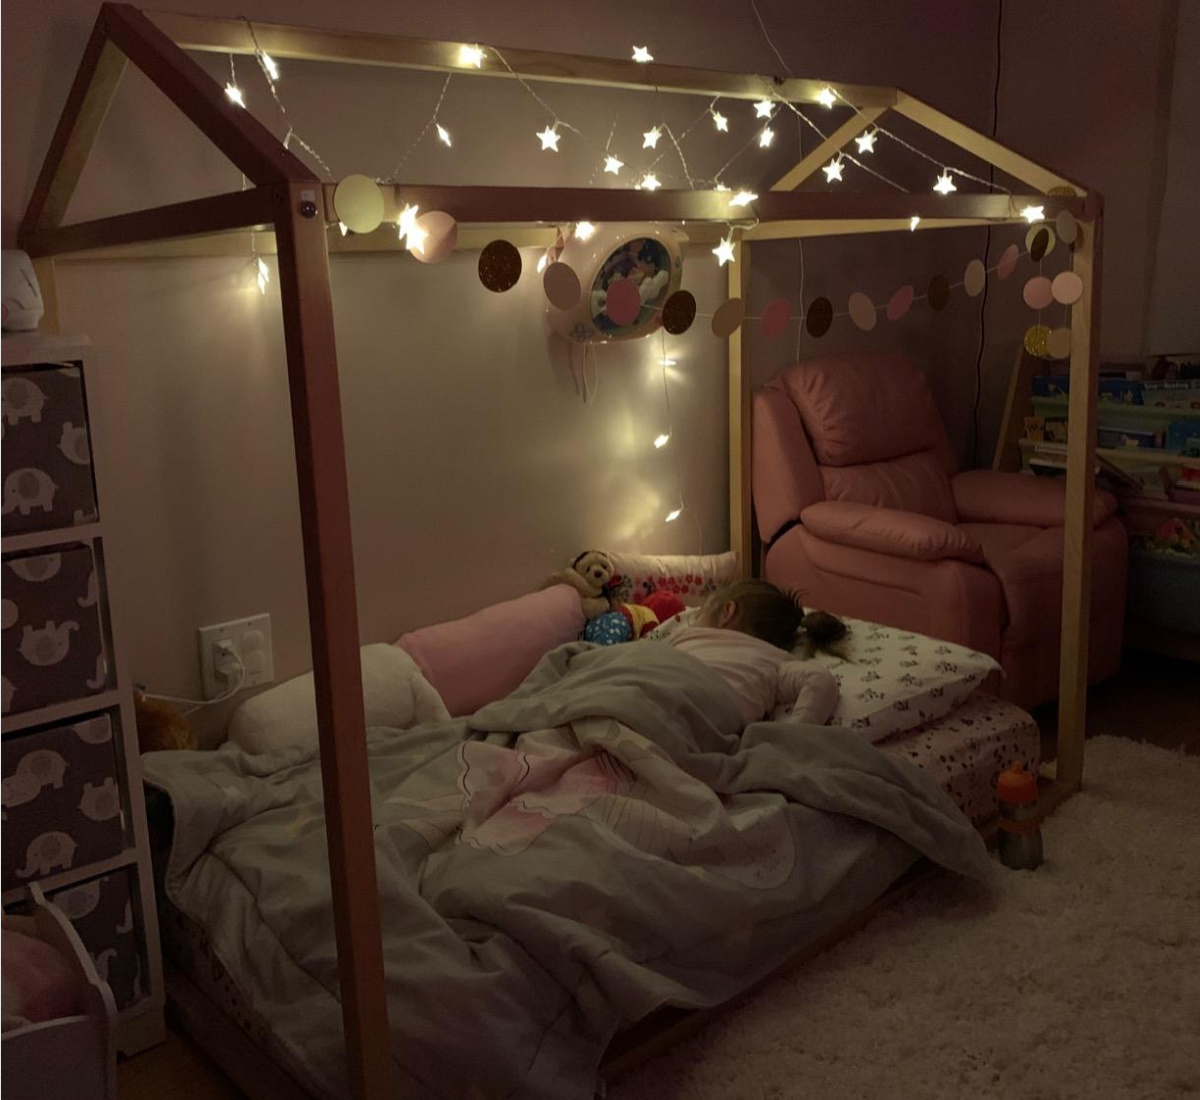 wooden kids bed with string lights above it